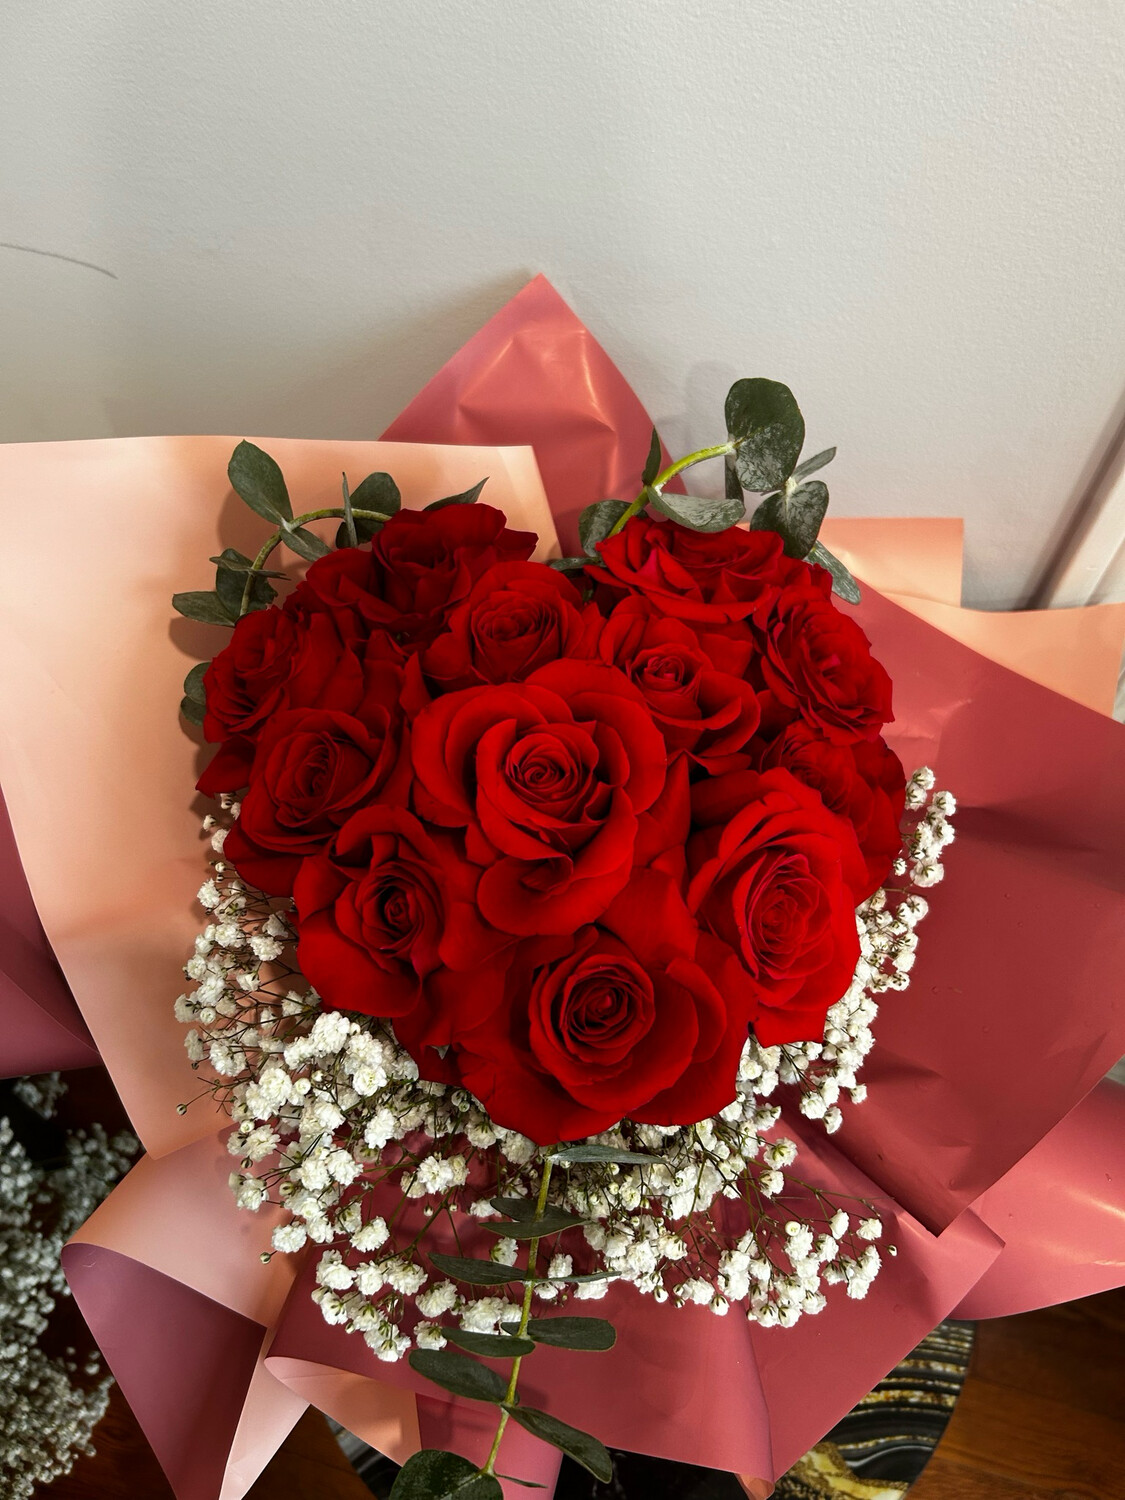 "Passionate Petals: Heart-Shaped Red Roses"